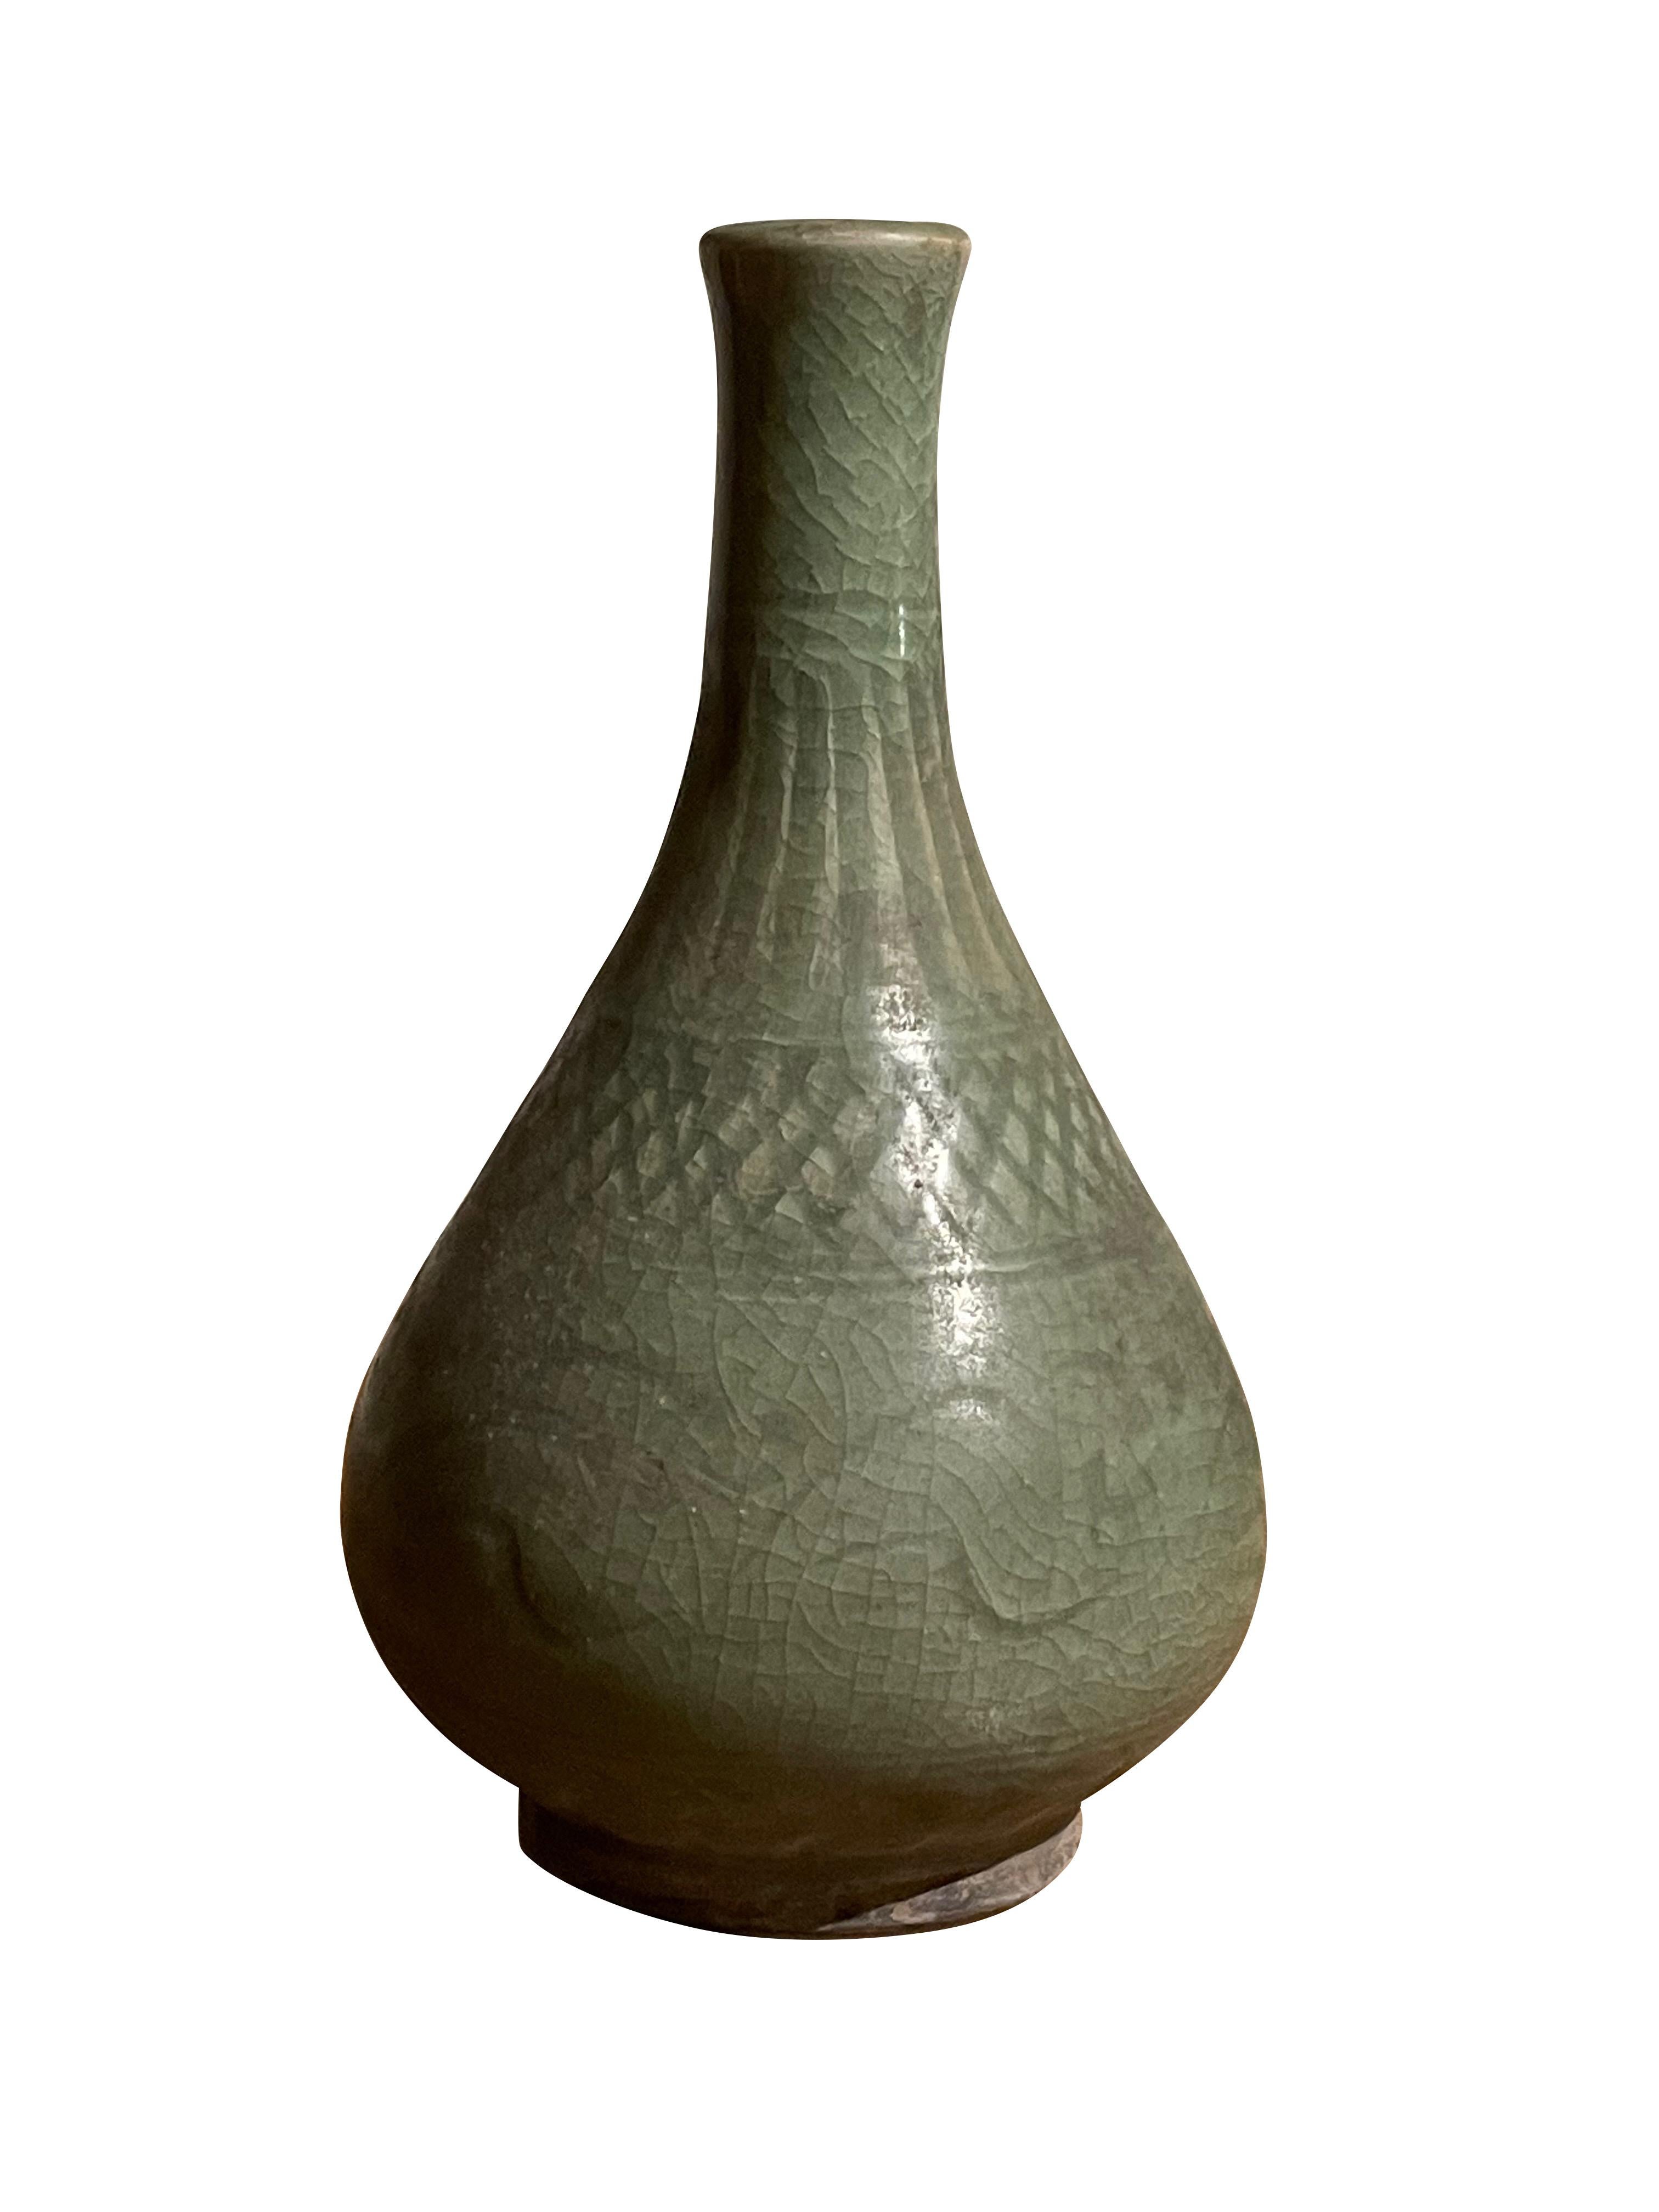 Contemporary Chinese pale celadon vase with decorative surface pattern.
Crackle finish glaze.
Slender neck with small opening.
Decorative crisscross pattern.
From a large collection.
ARRIVING MARCH